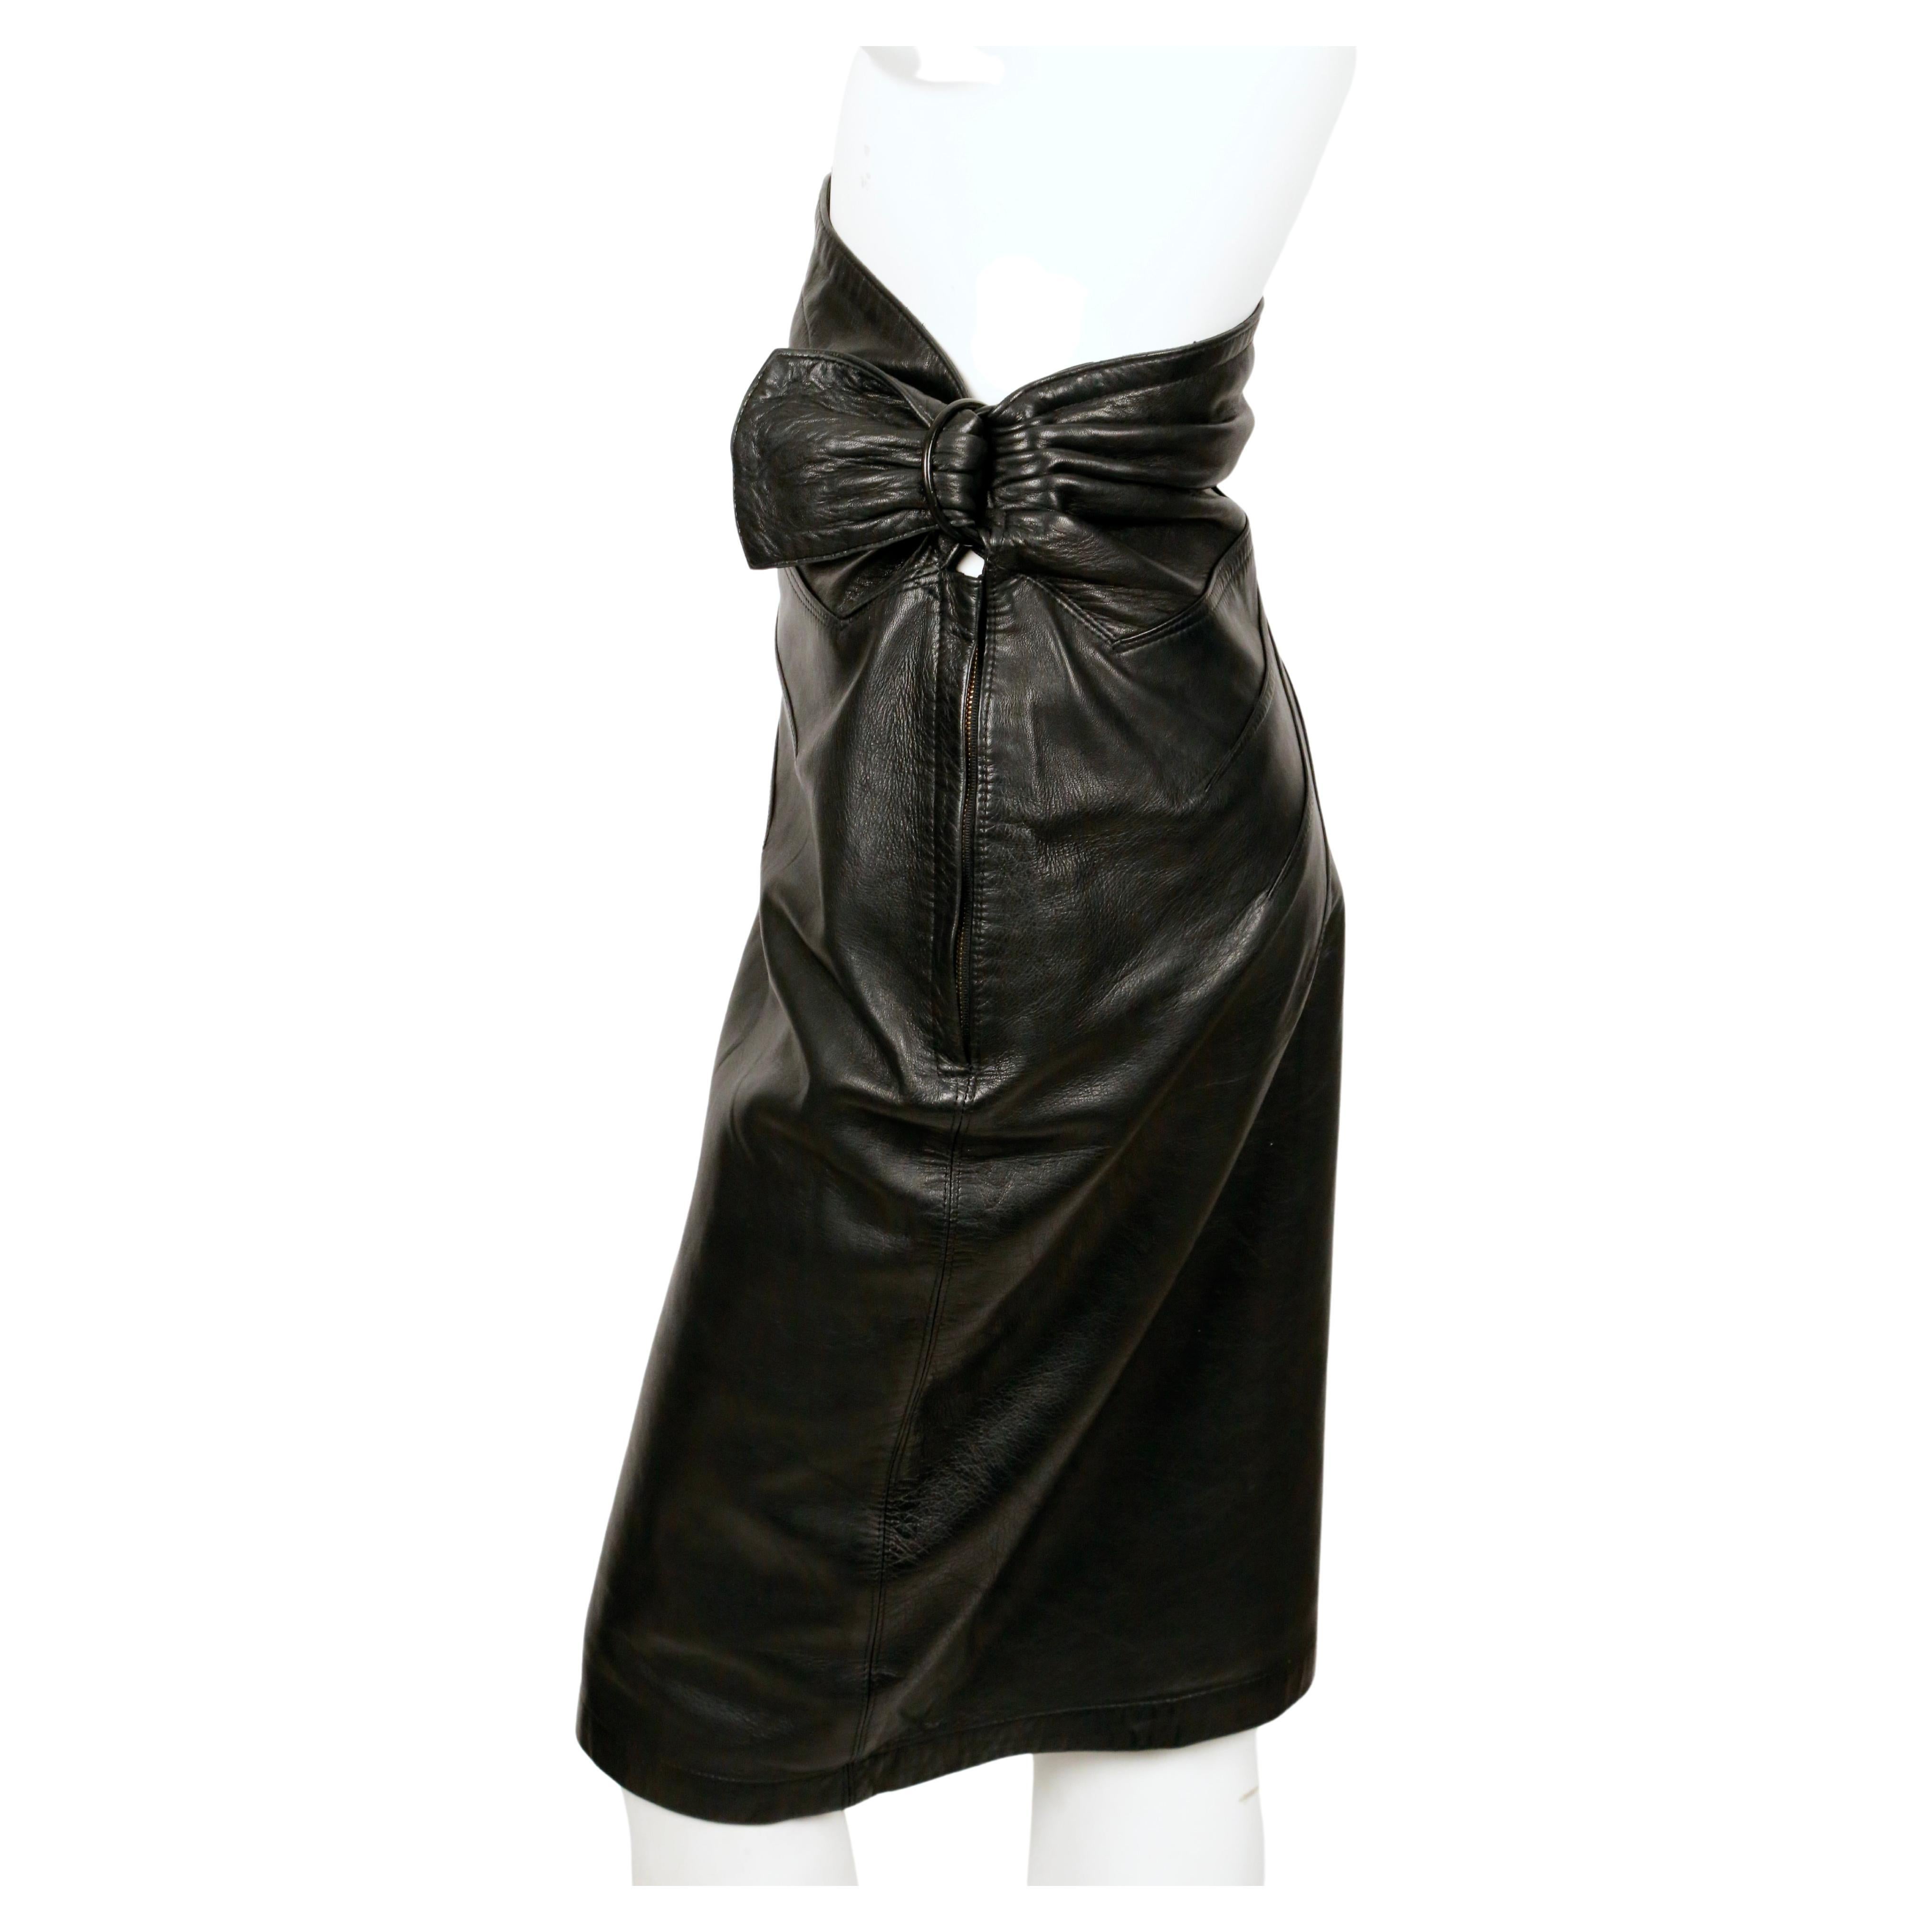 Black, butter-soft lambskin leather skirt with ruching, top-stitching and antiqued brass buckle detail from Azzedine Alaia dating to 1984. No size is labeled however this skirt best fits a U.S. size 6. Approximate measurements: waist 26-27